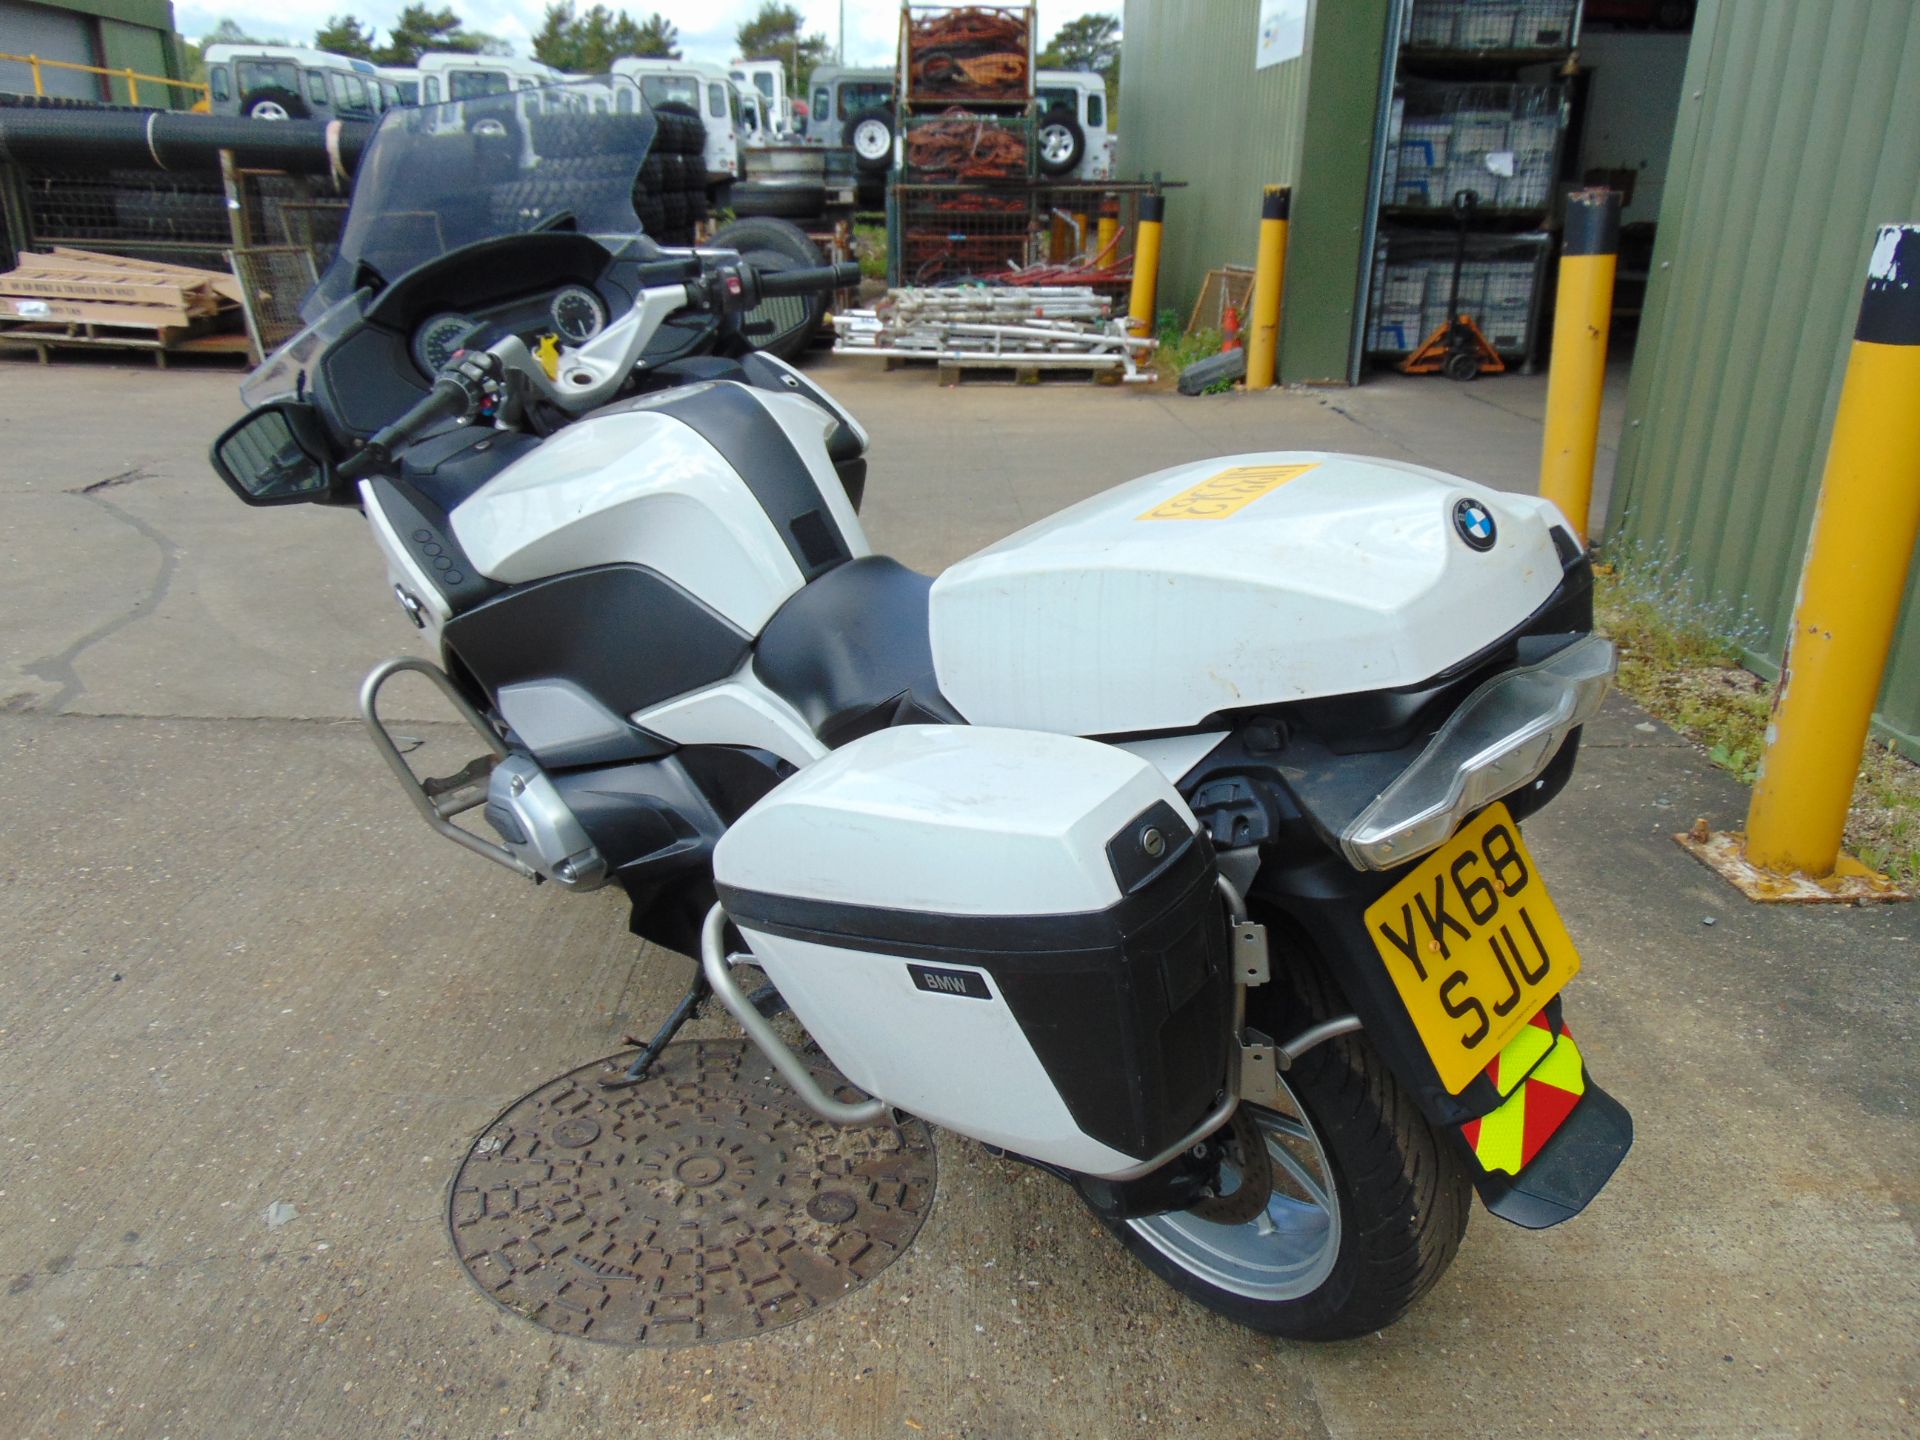 UK Police a 1 Owner 2019 BMW R1200RT Motorbike - Image 7 of 20